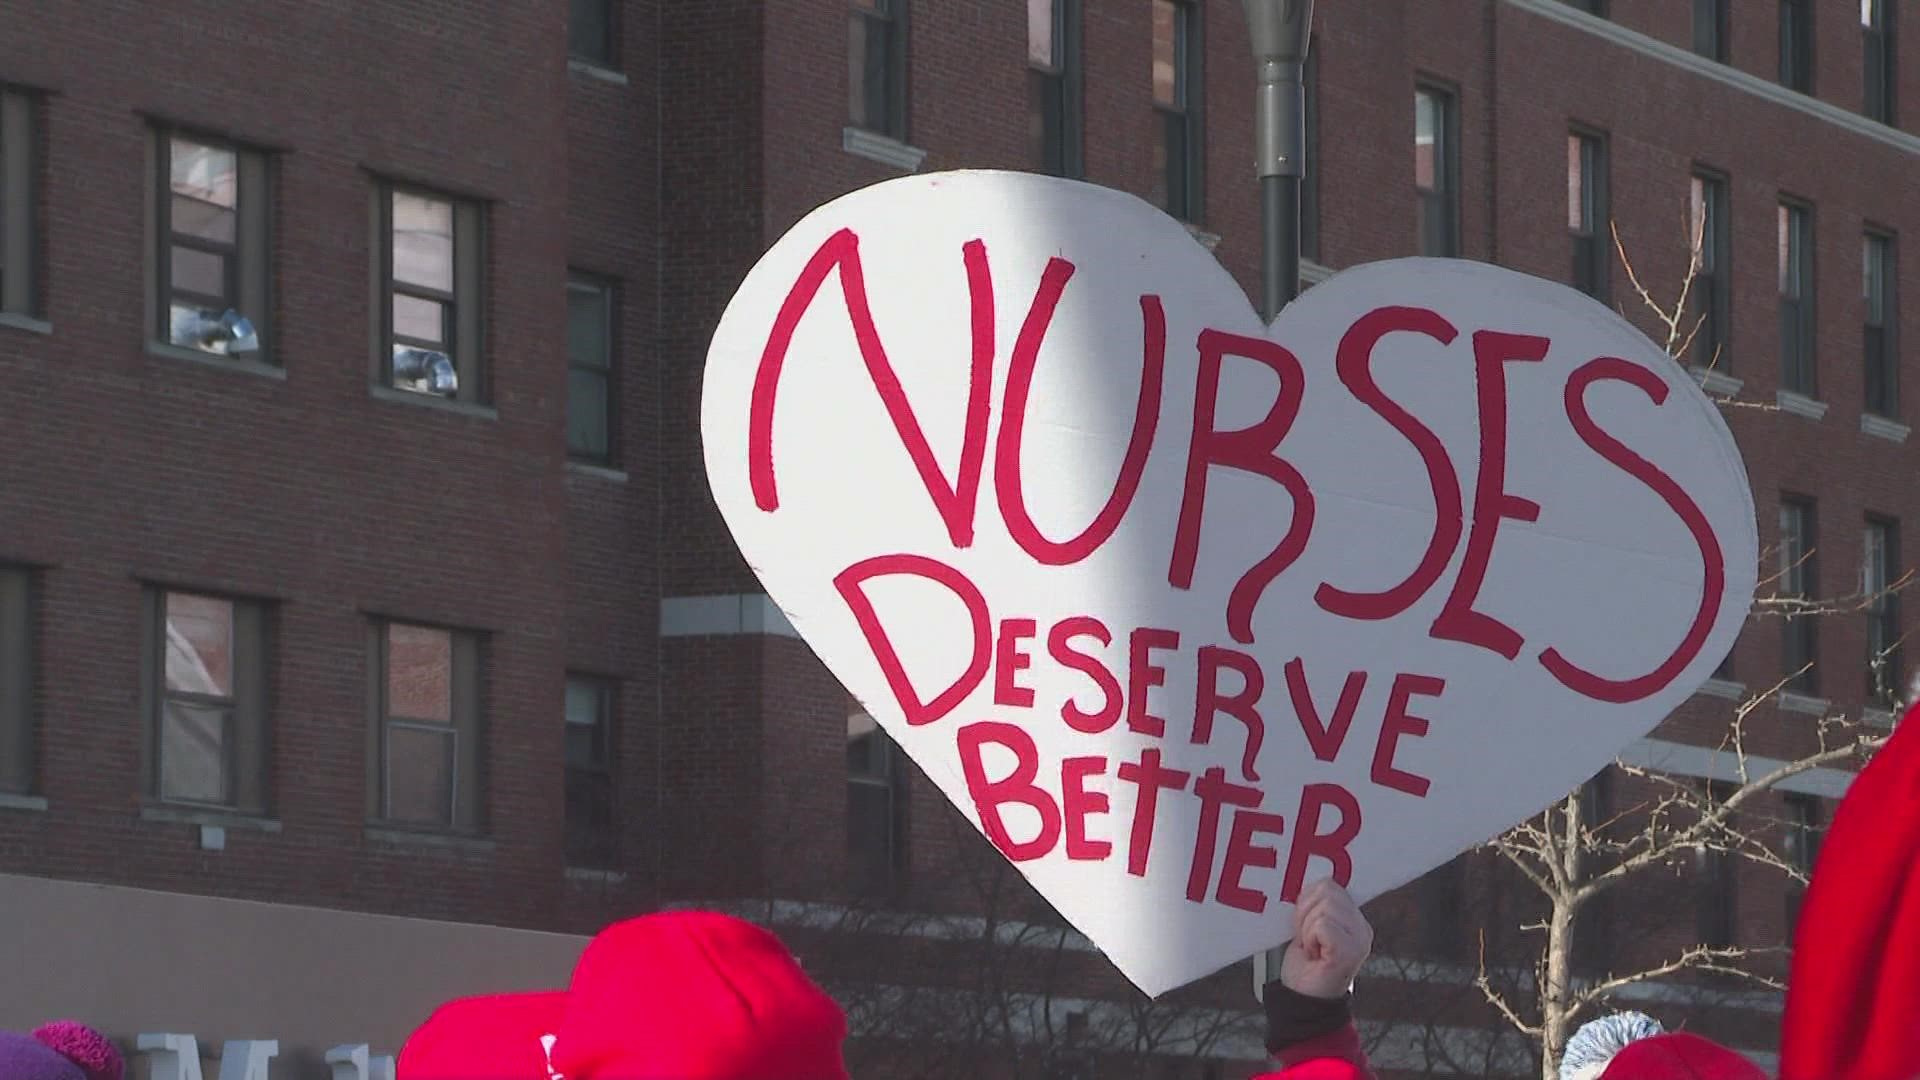 The hospital announced last week it terminated nurses' paid leave for bereavement, jury duty, and military service. Many spoke out against the decision Wednesday.